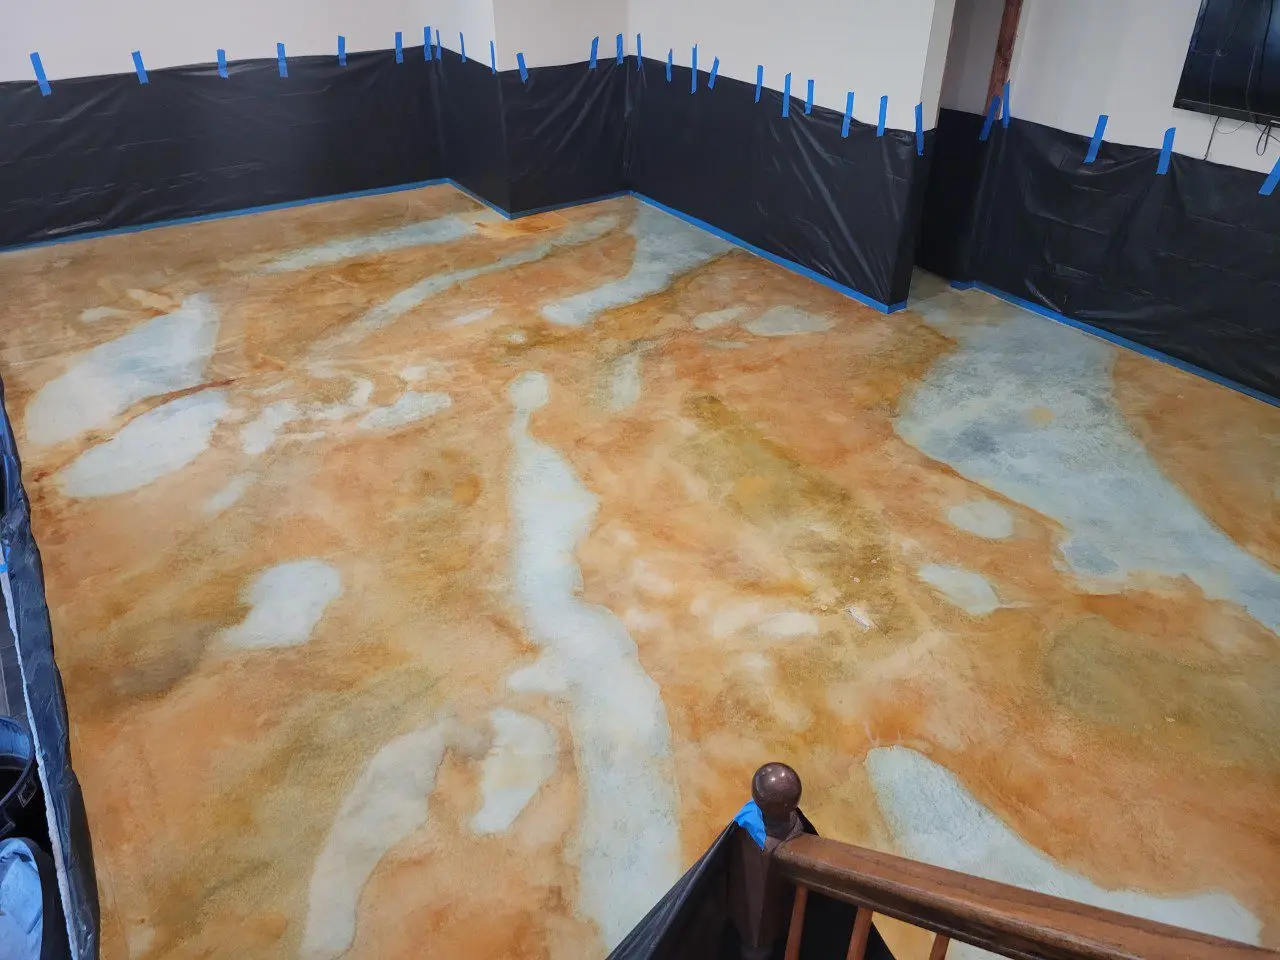 A fully stained basement floor, after allowing the acid stains to react overnight